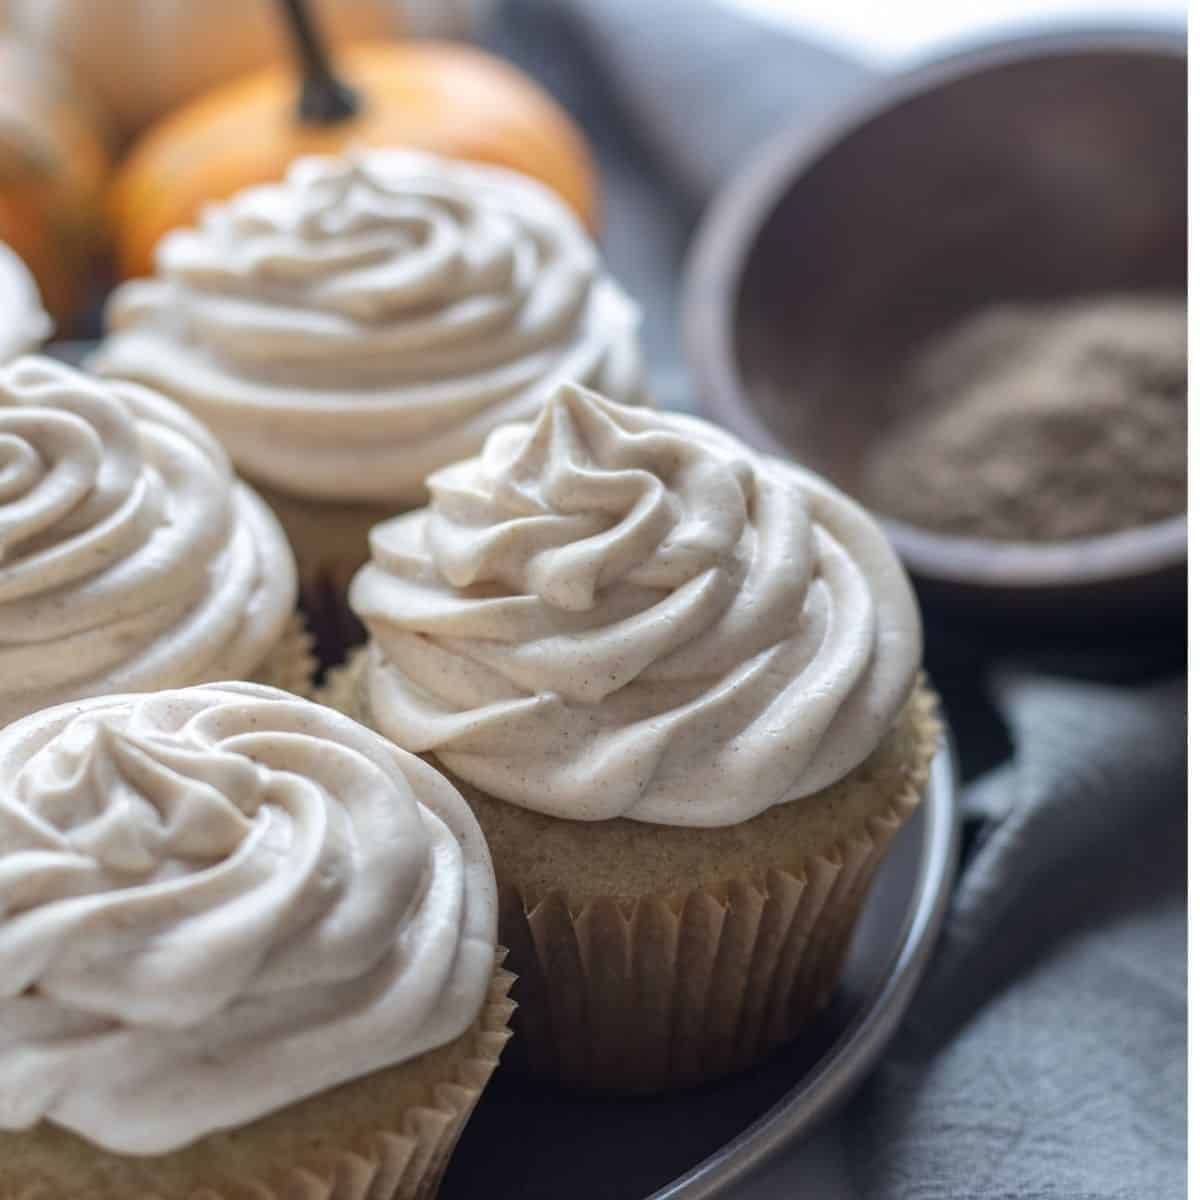 Cardamom Cupcakes with Cinnamon Cream Cheese Frosting